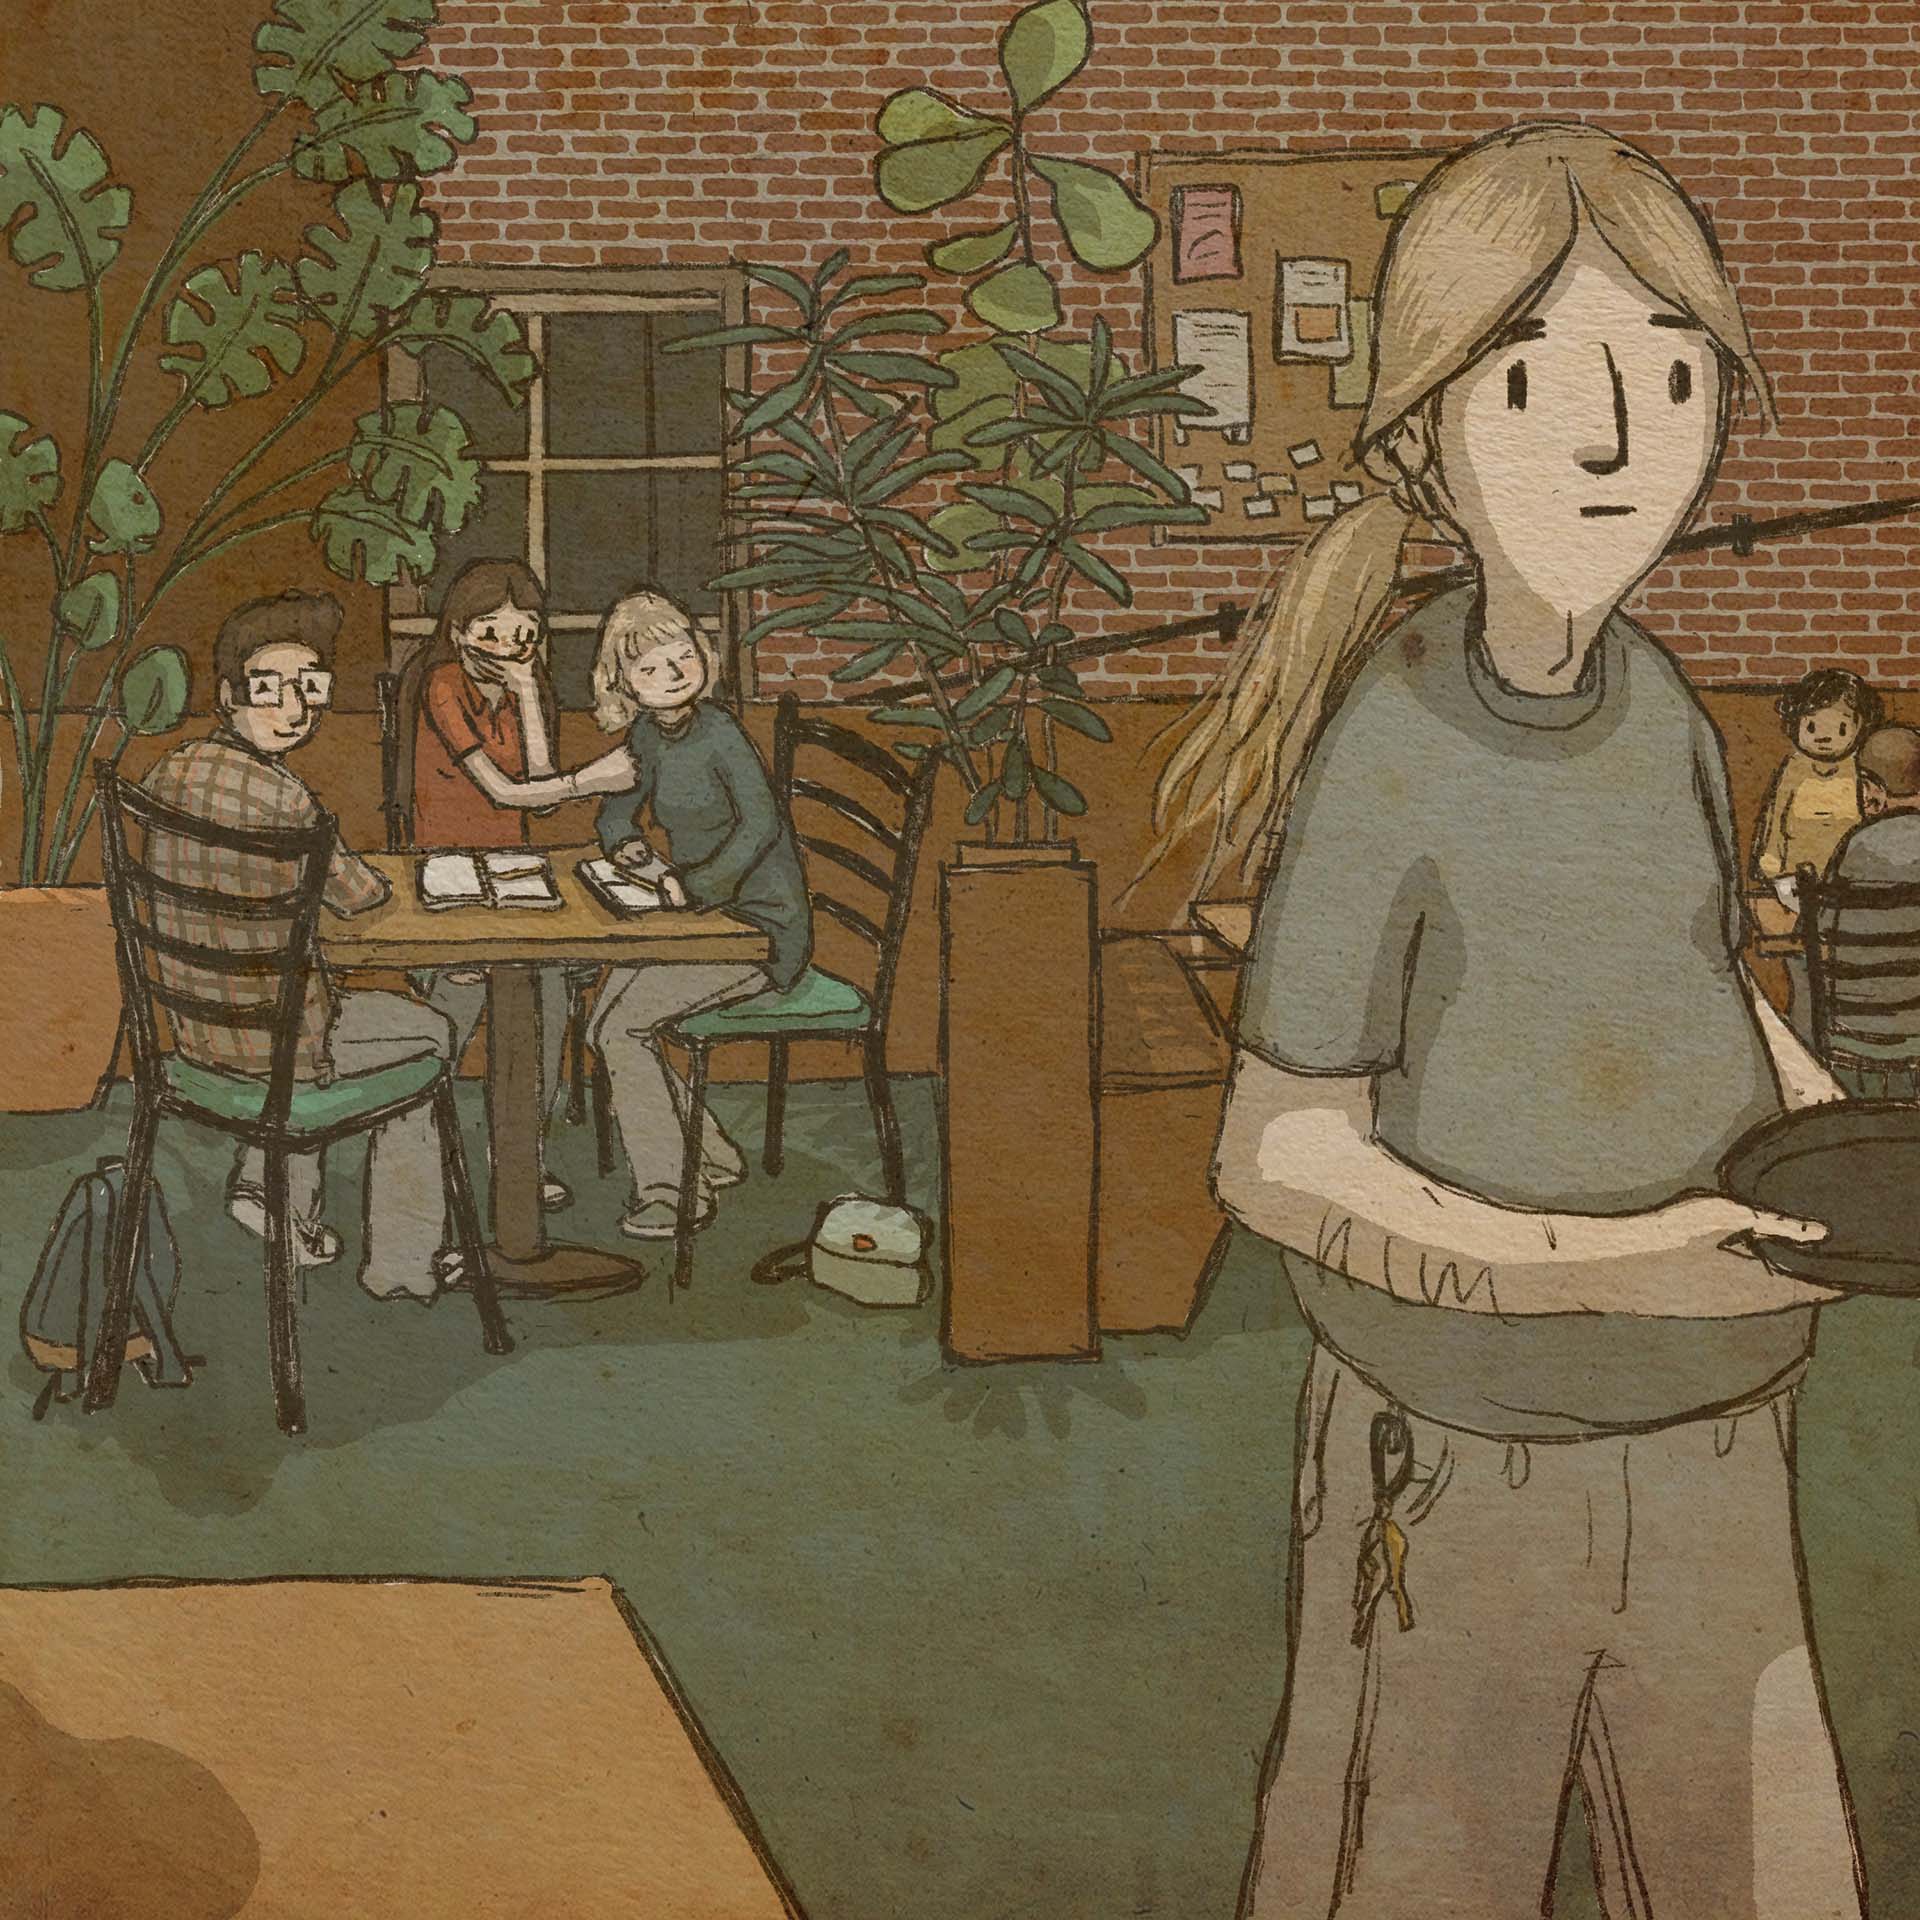 A young man with a blonde ponytail and a keychain attached to his gray pants walks past the three friends' table holding a tray. Briana (in a red shirt) covers her mouth and nudges her friend.